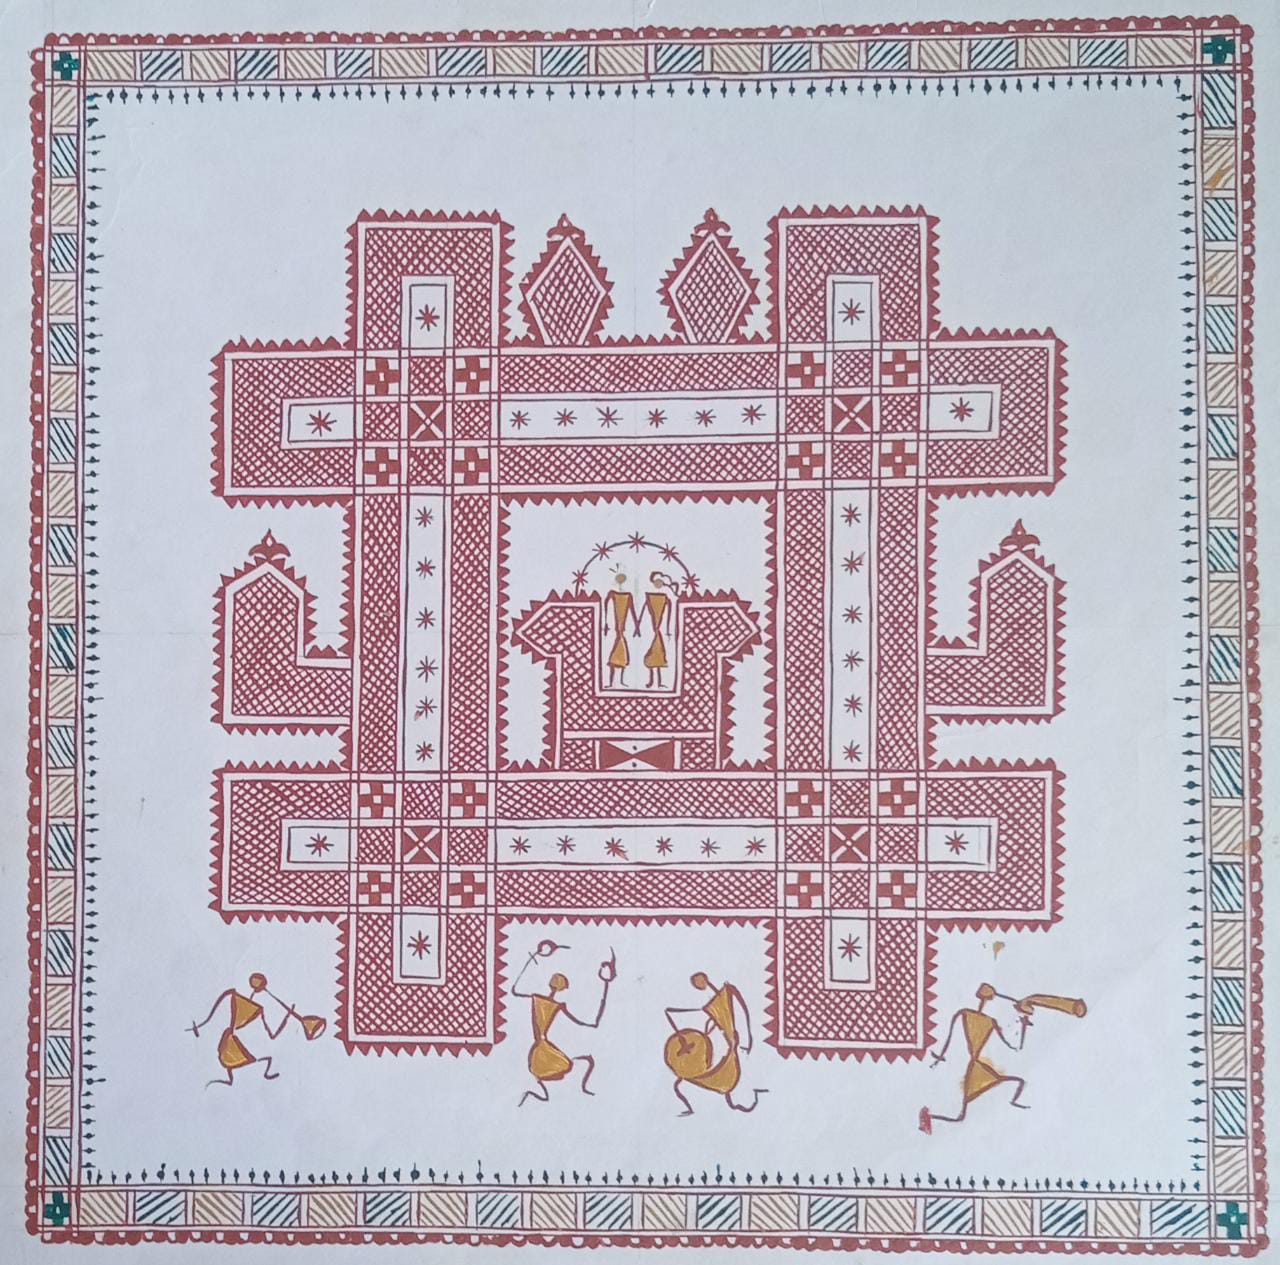 Chittara Marriage Painting by bamboo thread art without frame  Artist: State Awardee Saraswathi (Size: 12x12 Inches)